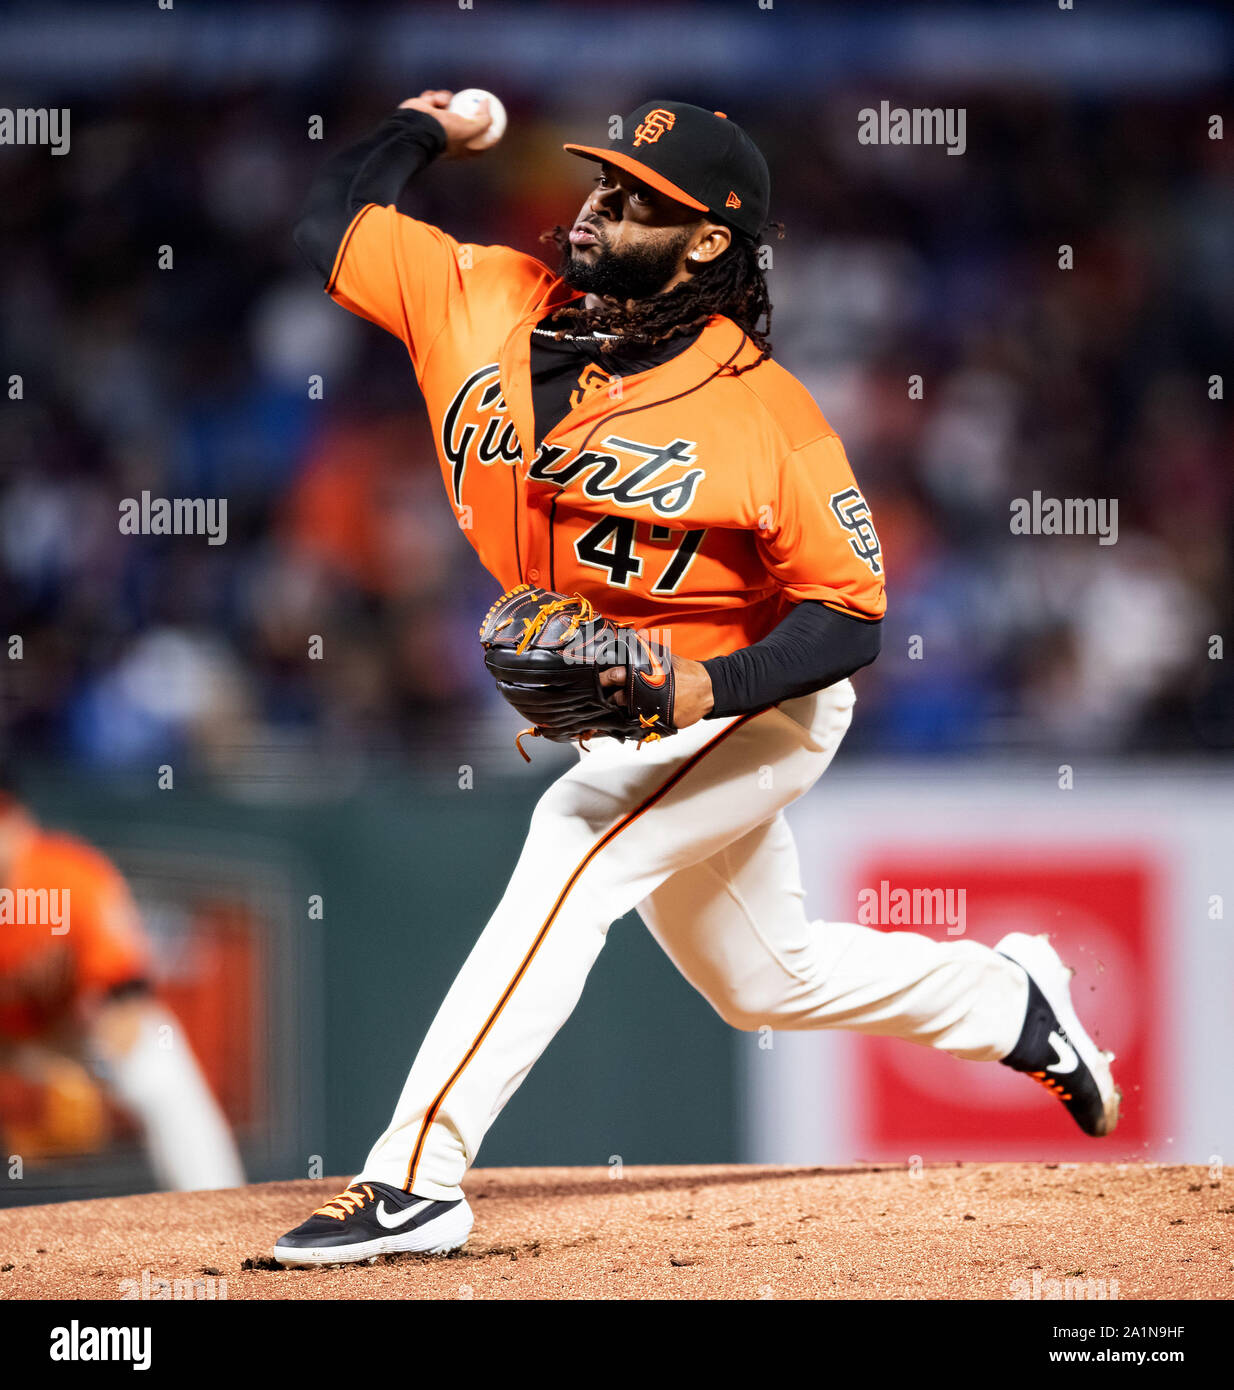 San Francisco, California, USA. 27th Sep, 2019. In his second start after Tommy John surgery, San Francisco Giants starting pitcher Johnny Cueto (47) throws in the first inning, during a MLB game between the Los Angeles Dodgers and the San Francisco Giants at Oracle Park in San Francisco, California. Valerie Shoaps/CSM/Alamy Live News Stock Photo